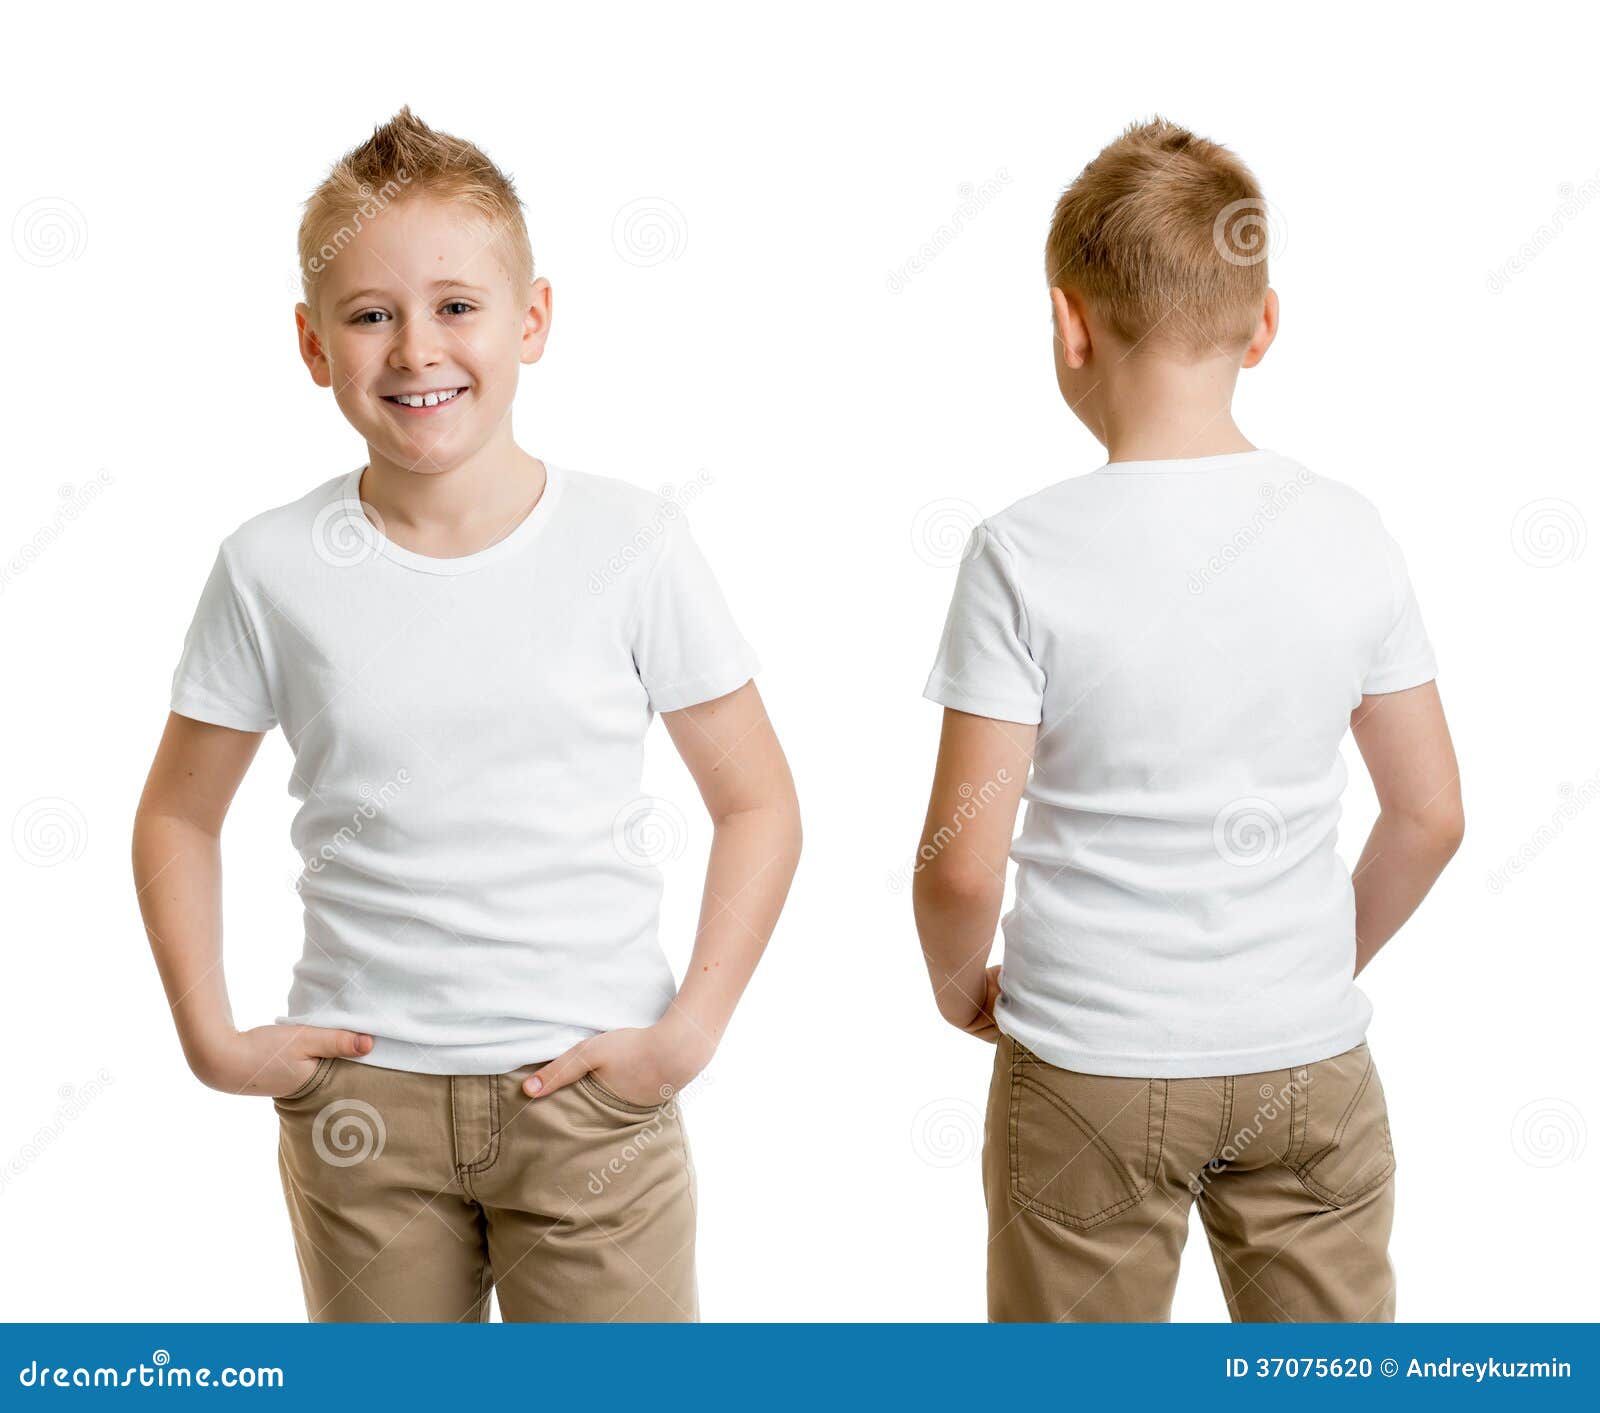 handsome kid boy model in white t-shirt or tshirt back and front